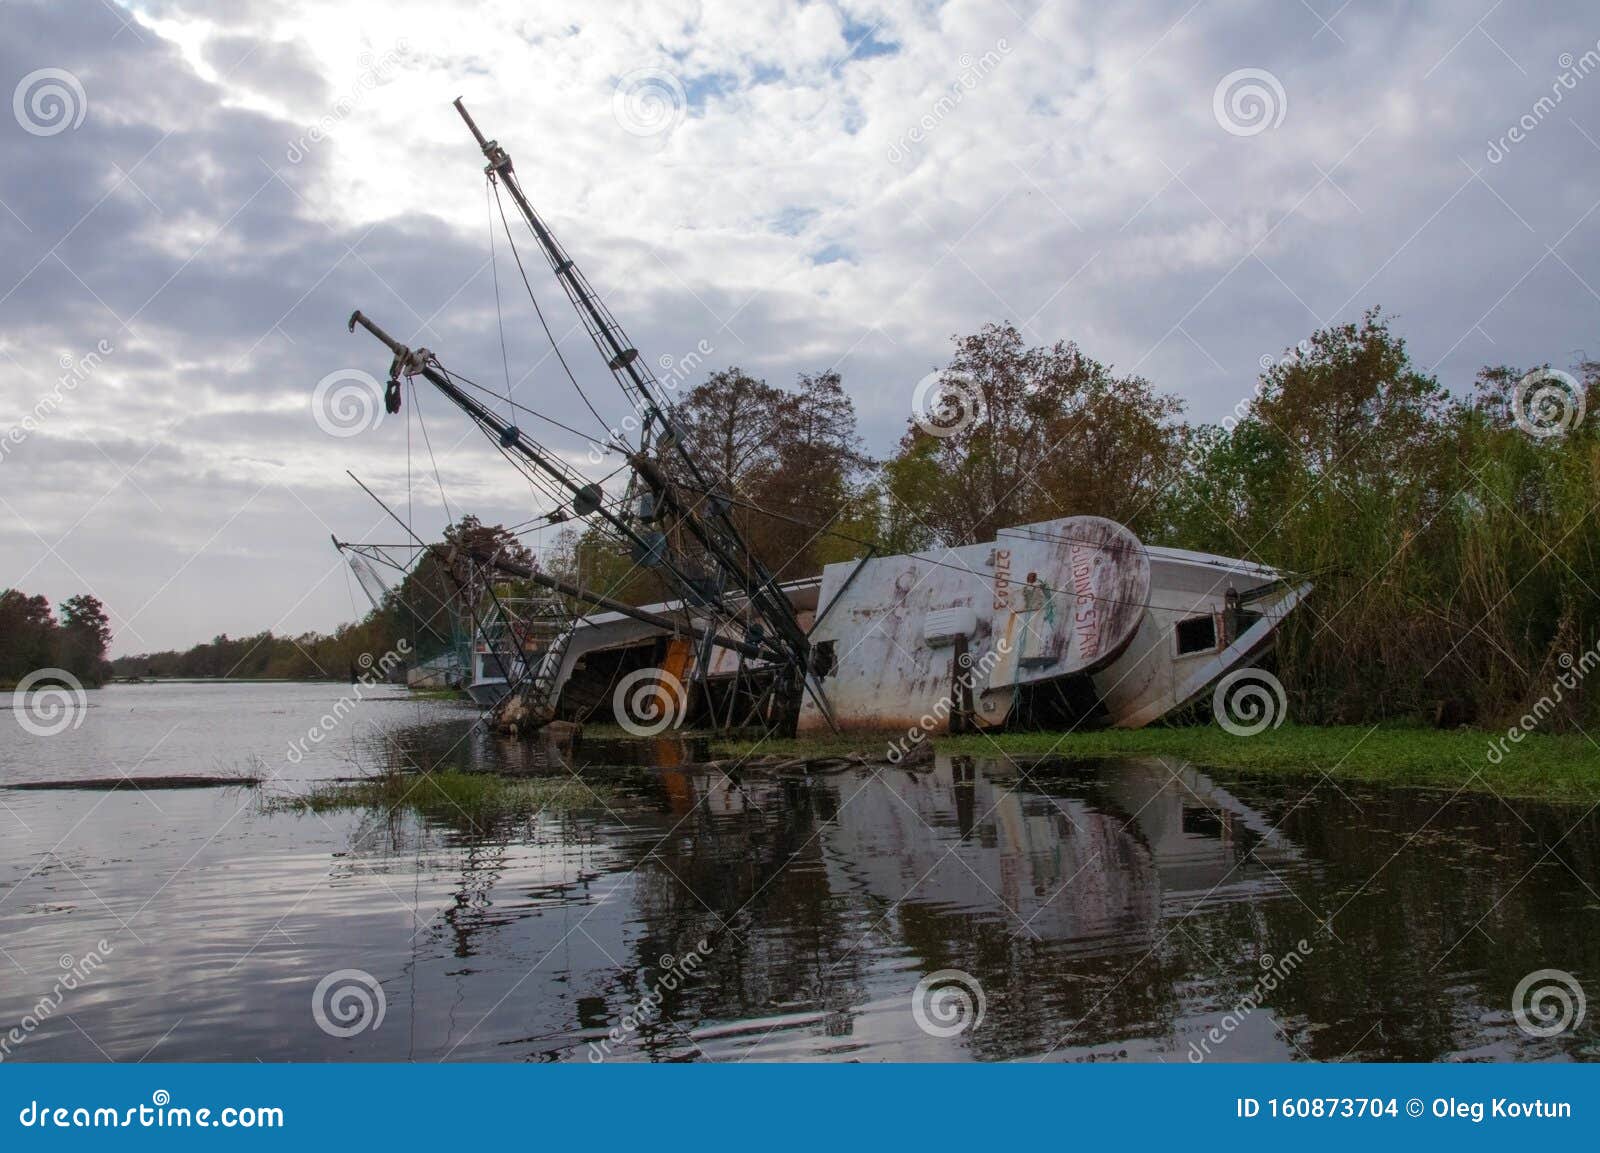 Upside Down And Flooded During Hurricane Sandy Yacht In New Orleans, Louisiana Editorial Stock ...